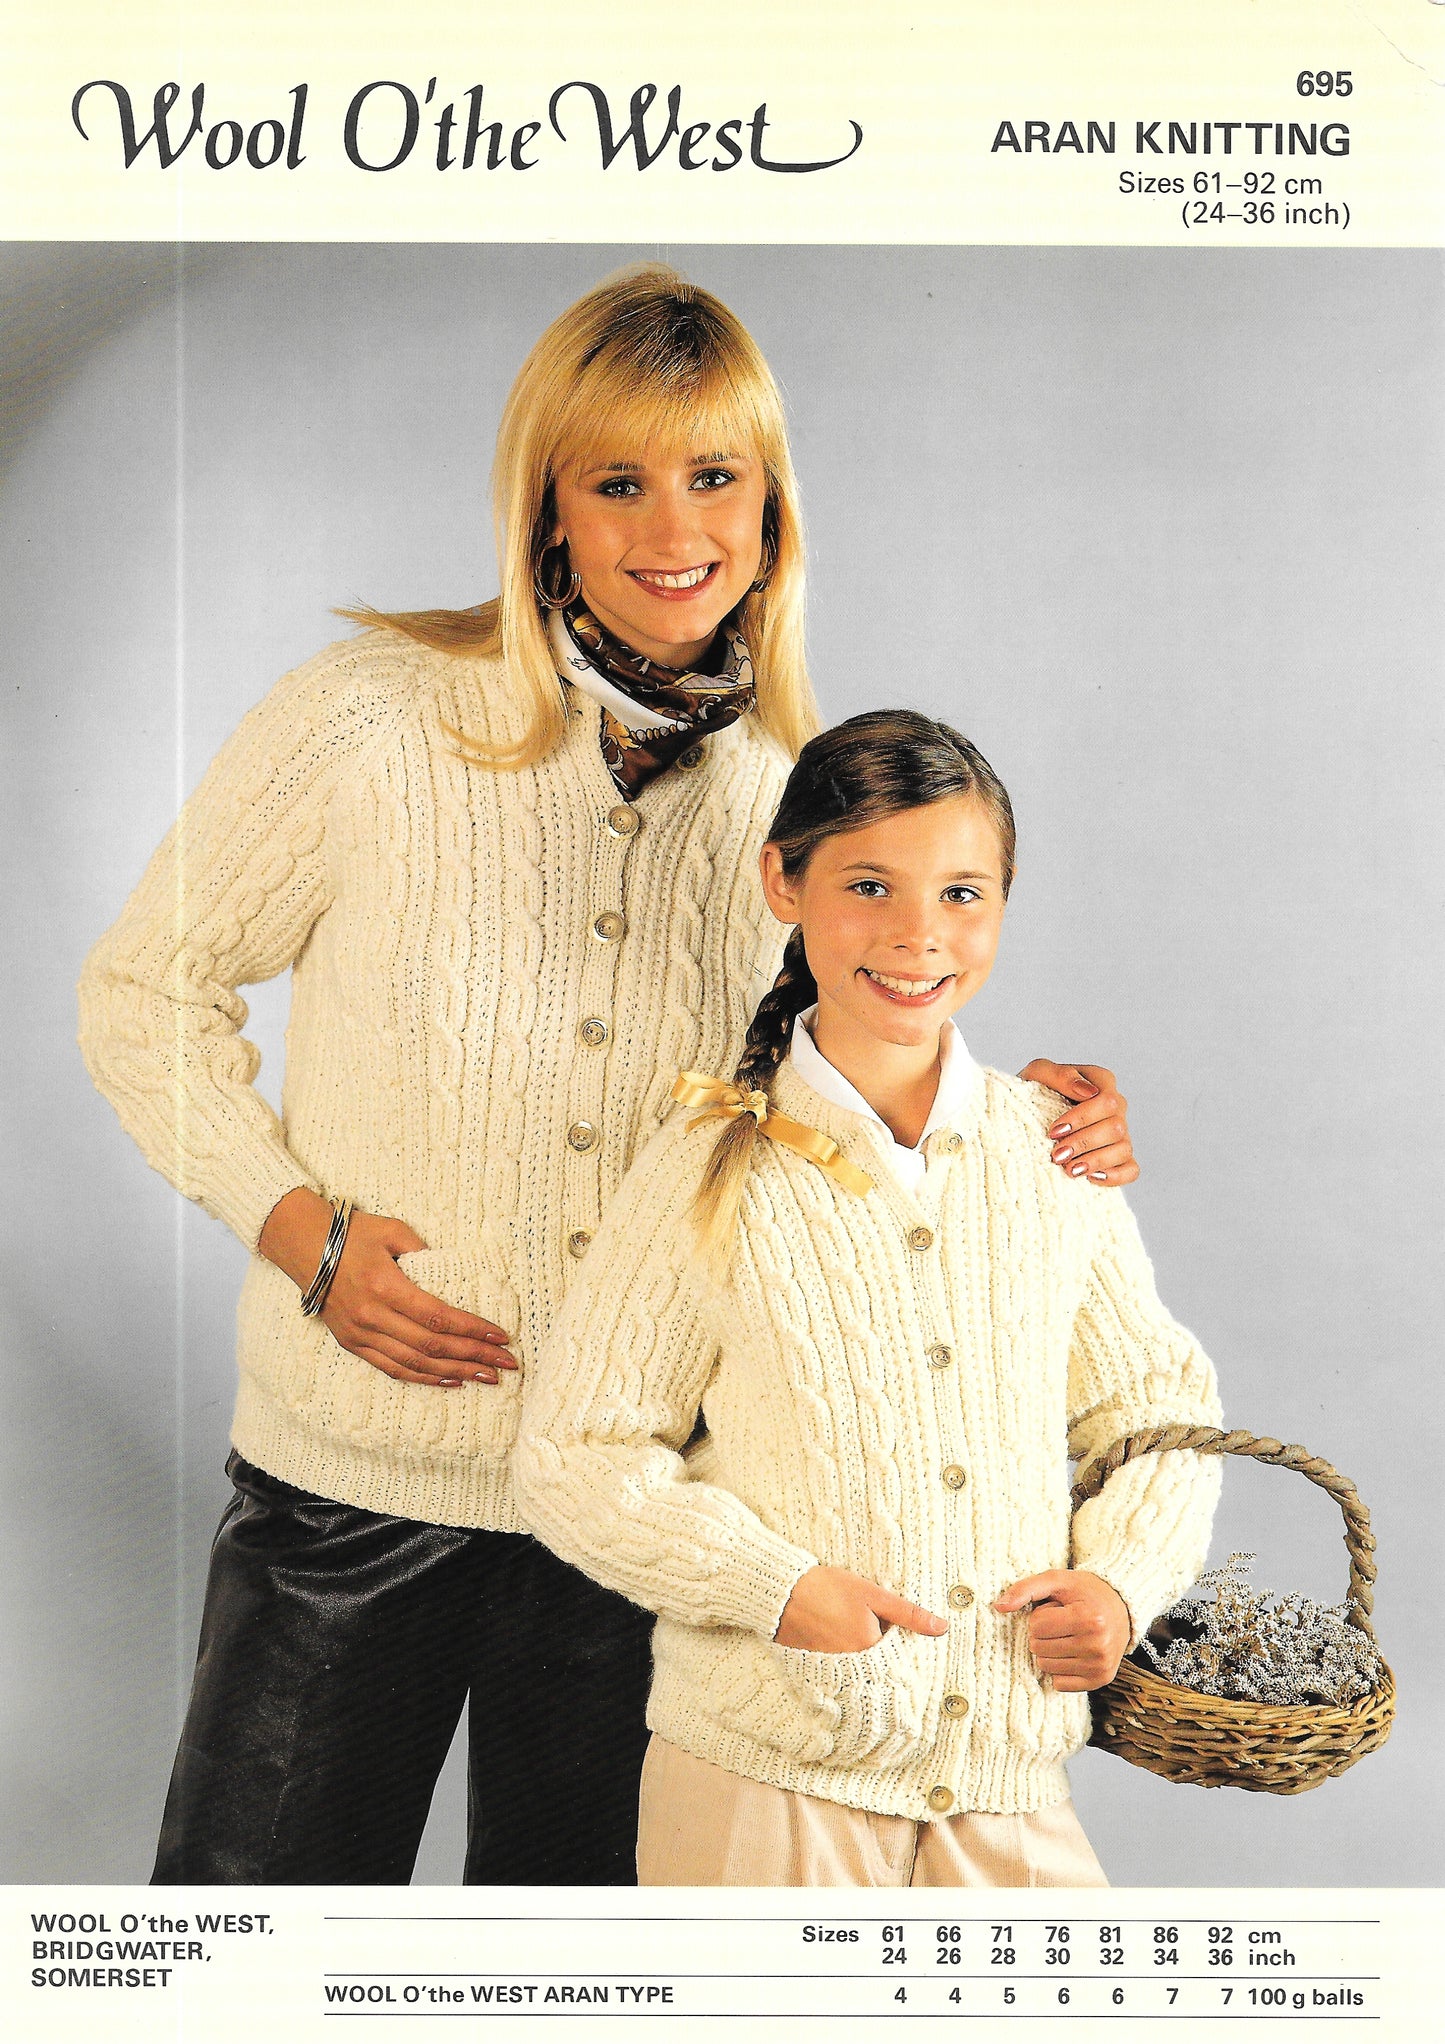 695 PRELOVED Wool O'the West Knitting Pattern. Family Aran Cardigans